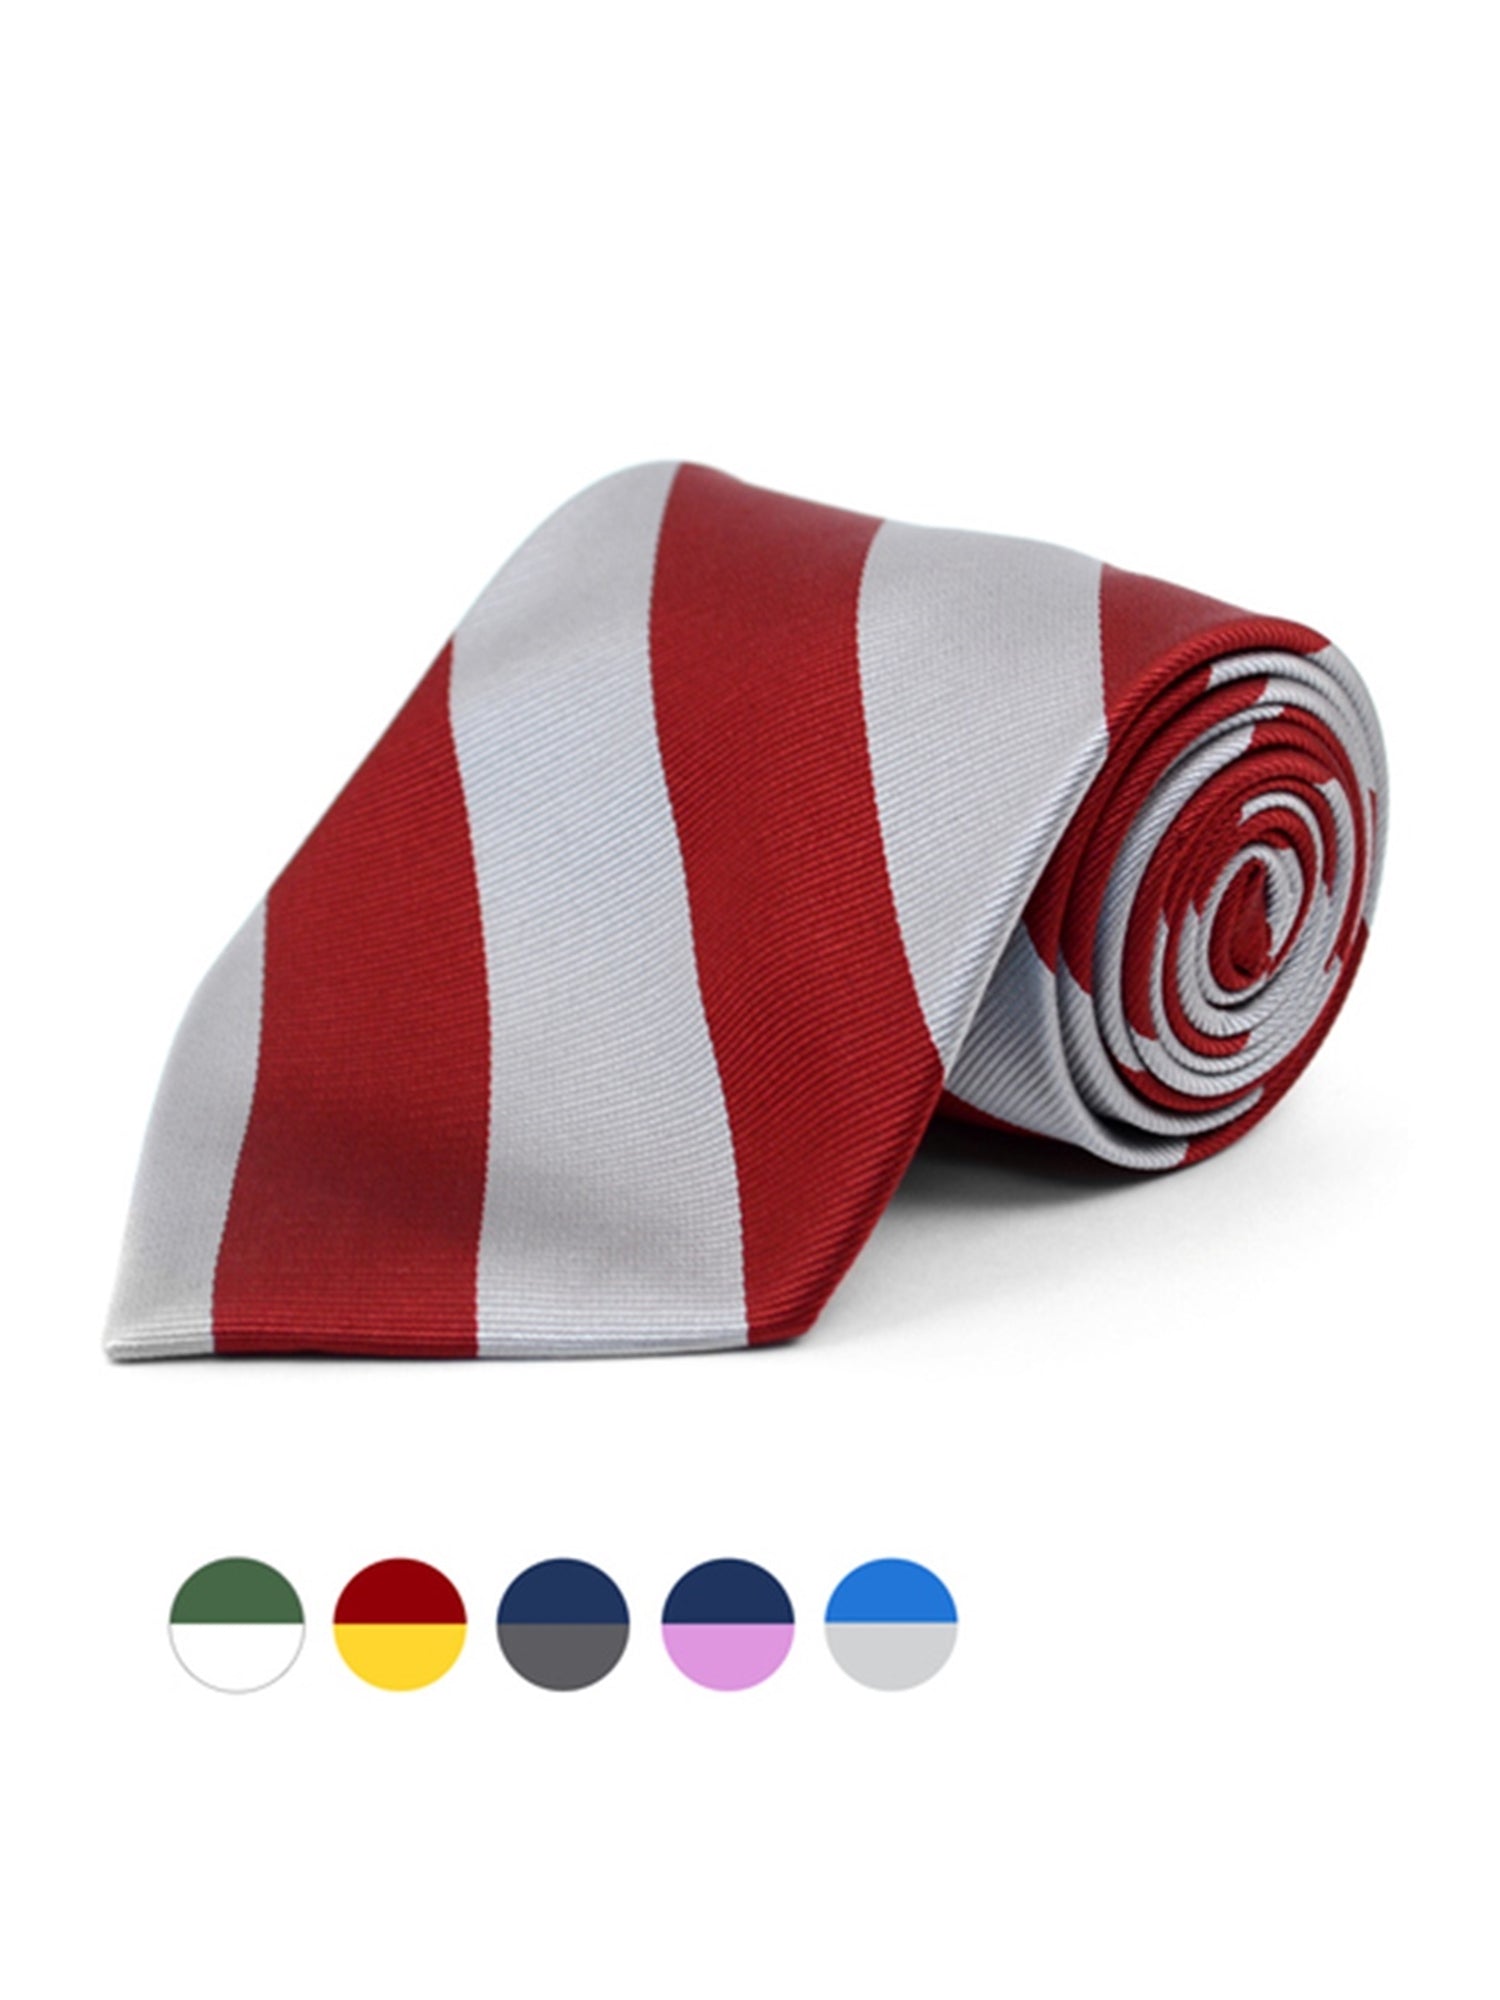 Men's College Striped Colored Silk Long Or X-Long Neck Tie Neck Tie TheDapperTie   